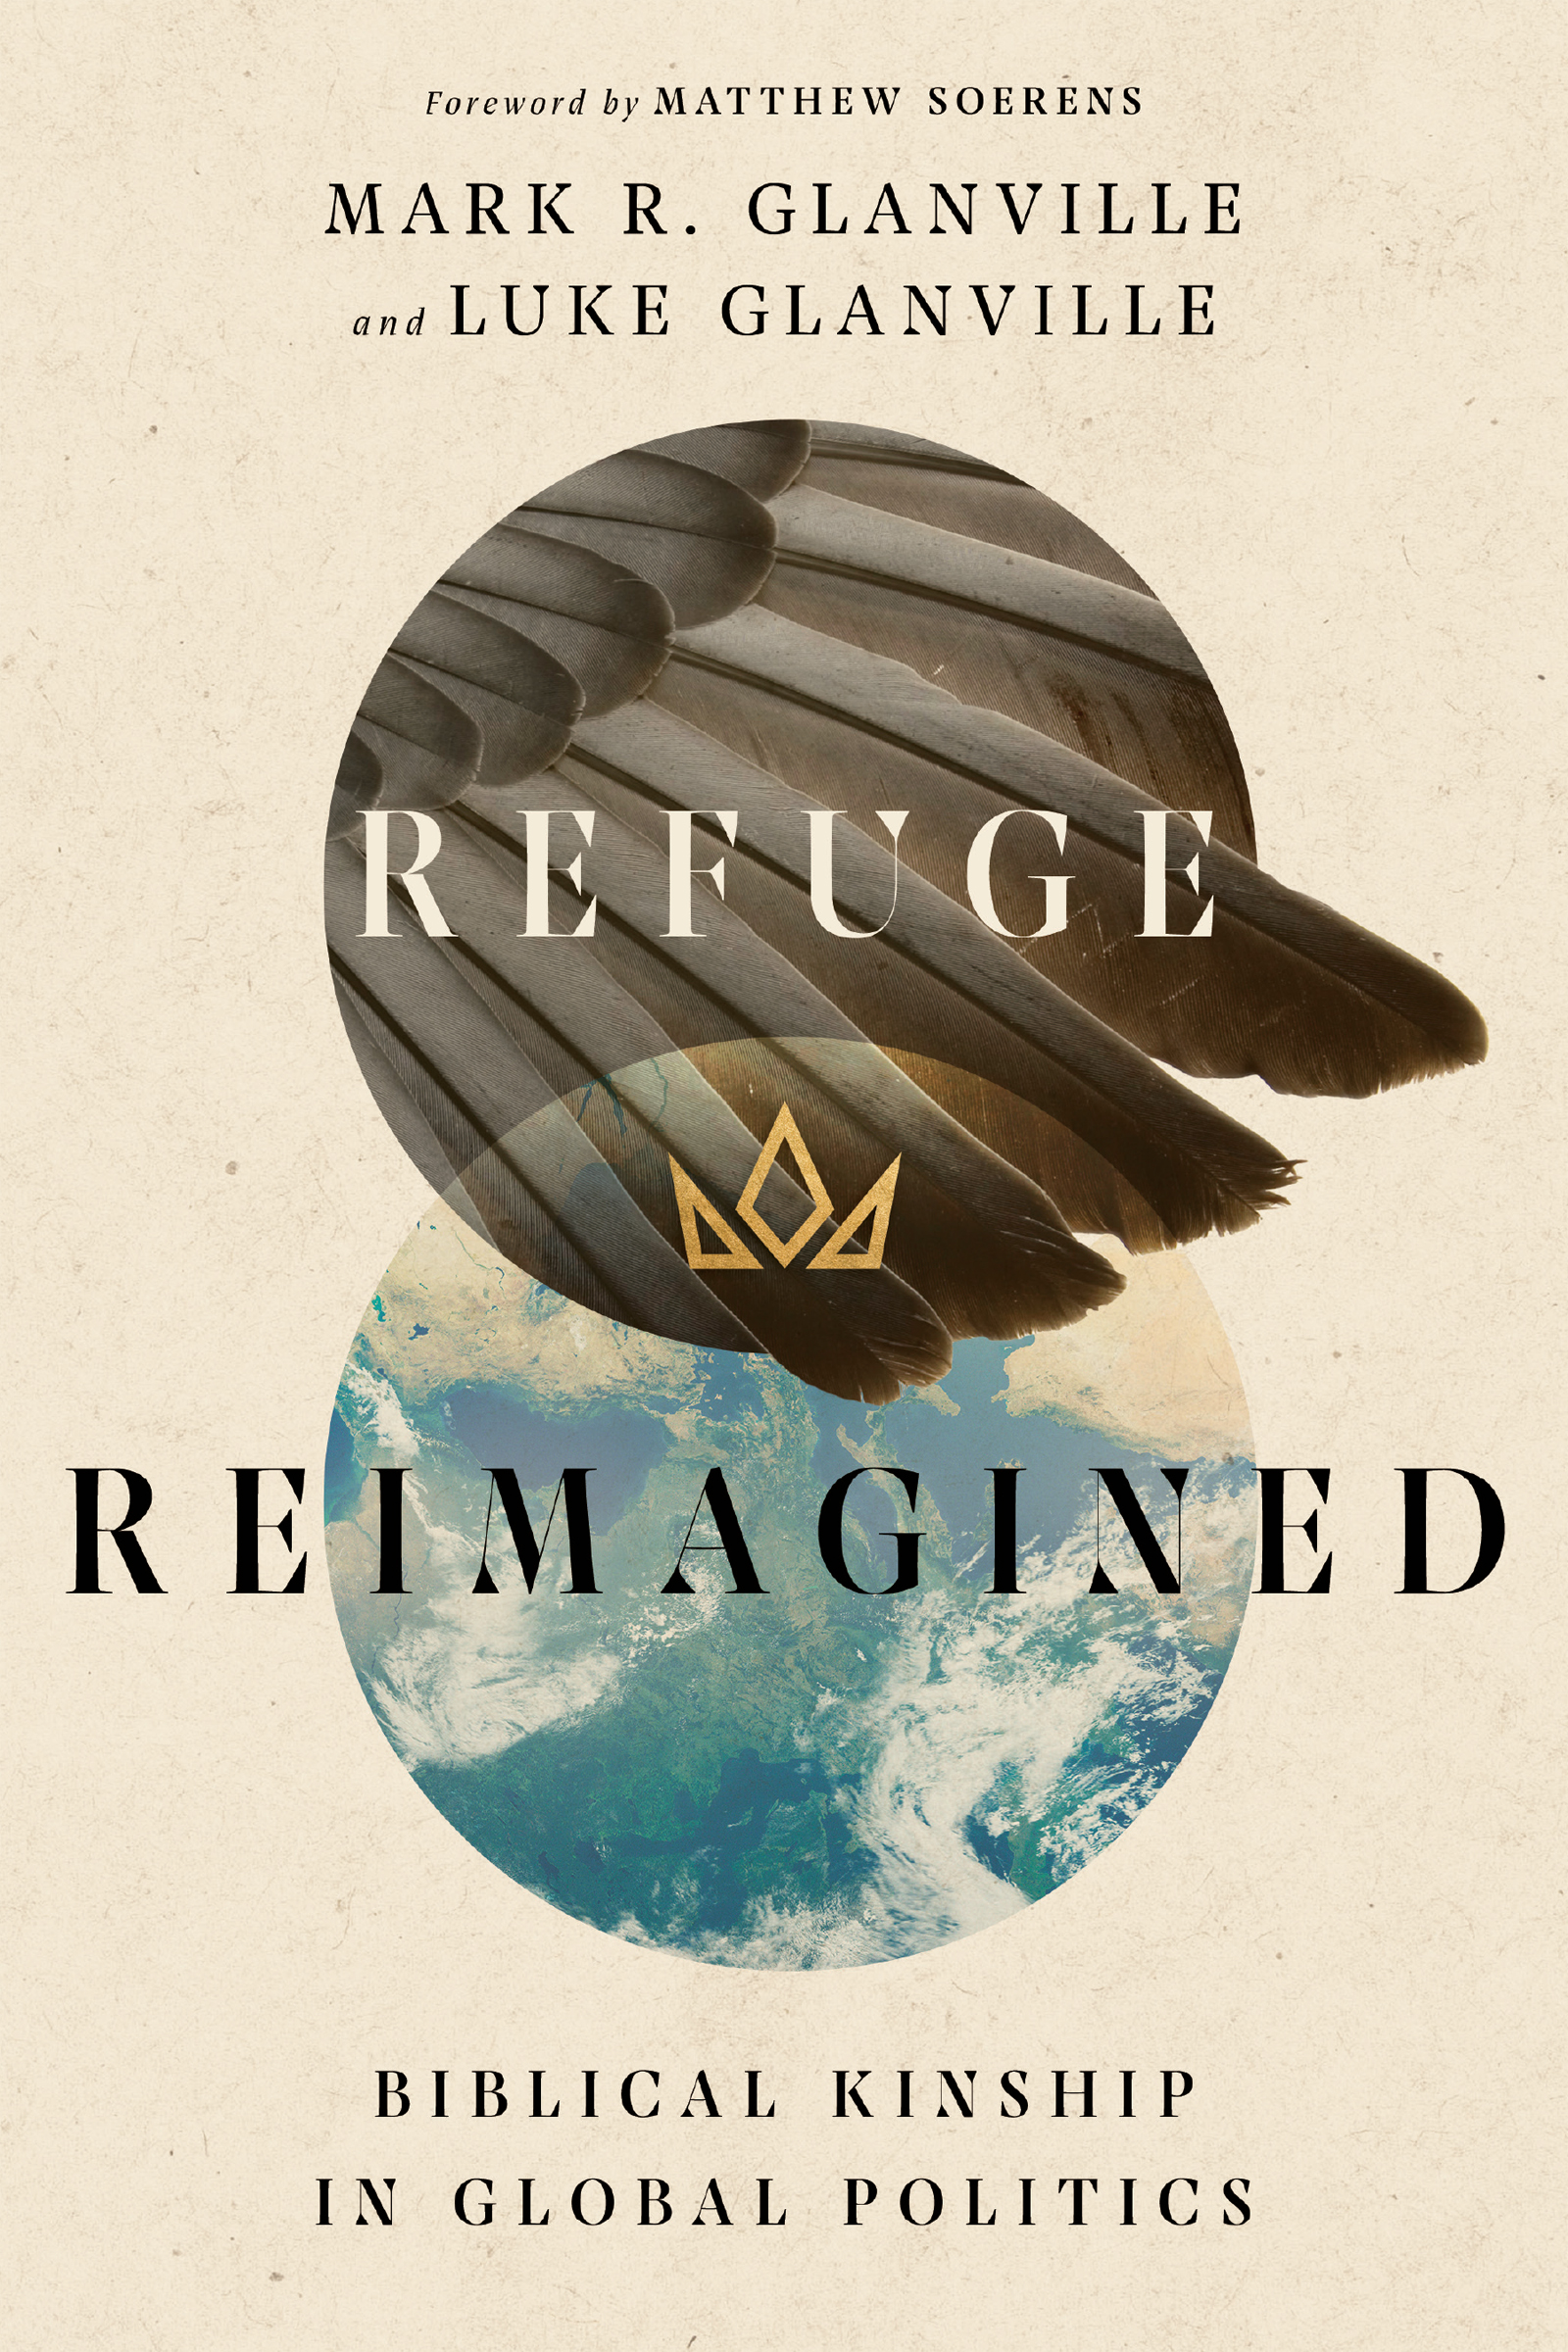 book cover "Refuge Reimagined" two overlapping circles of feathers and oceans